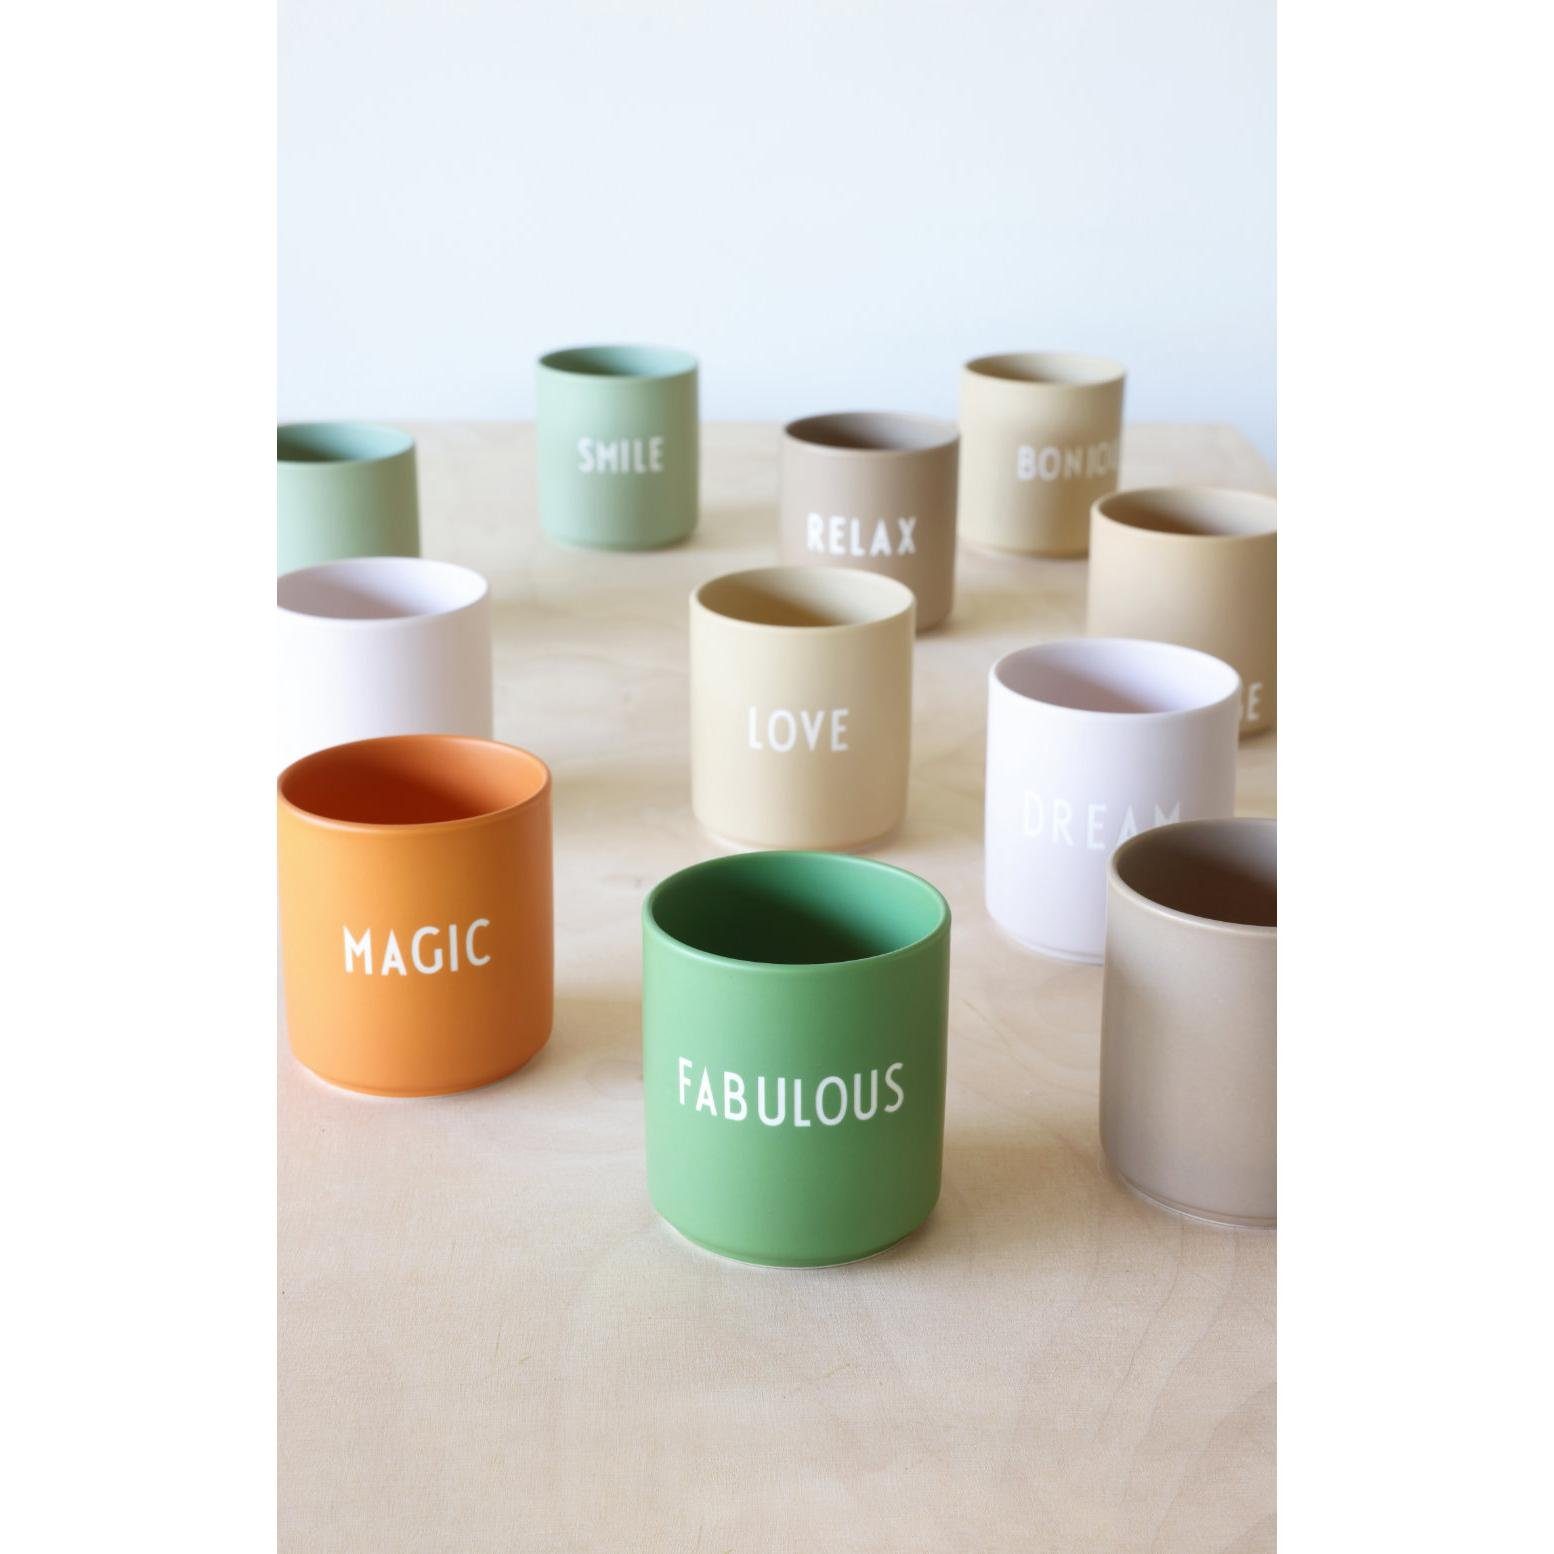 Design Letters Favourite Tendril Becher Green Cup Fabulous Tasse